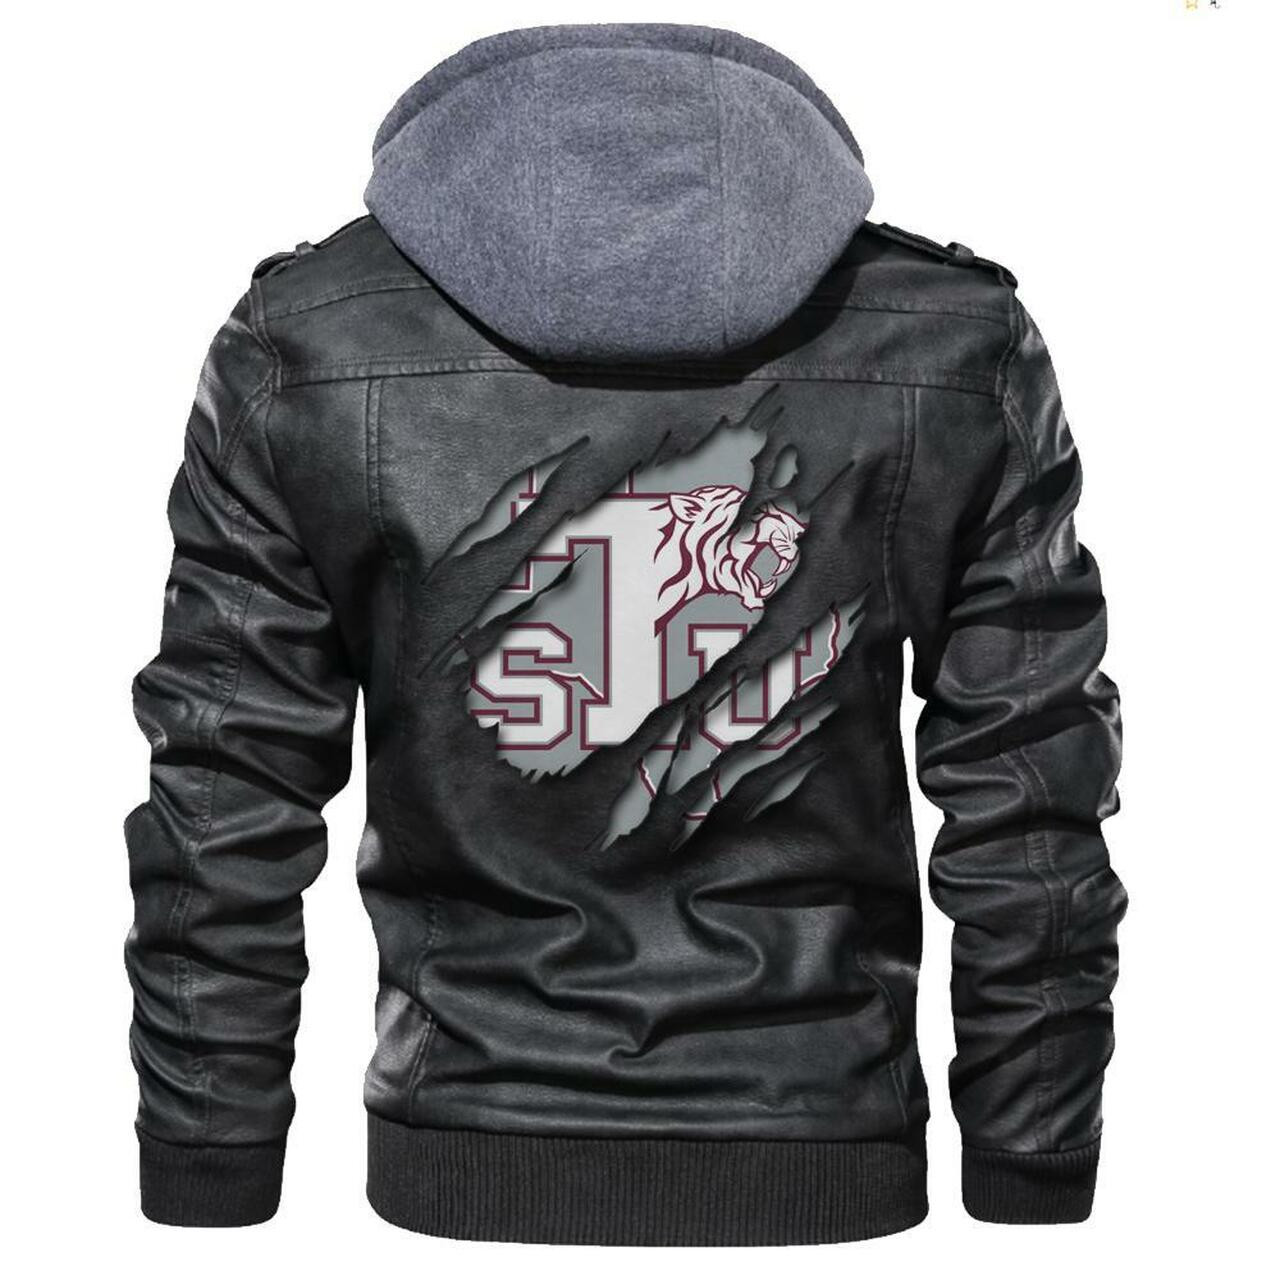 Top leather jackets are the perfect choice for the active man. 327